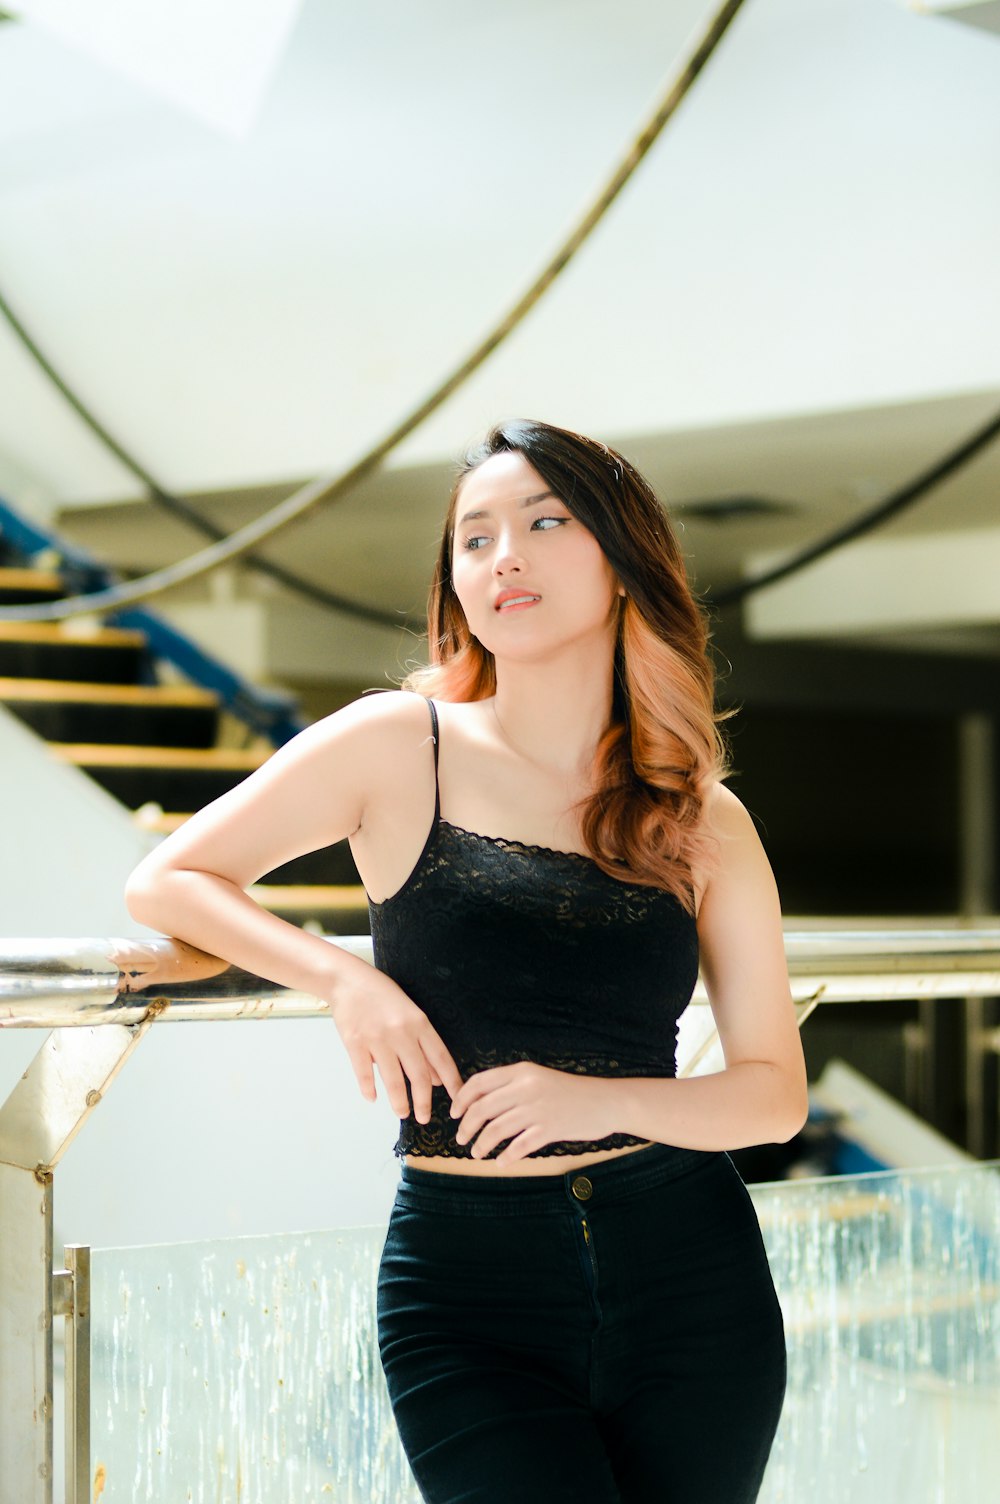 a woman in a black top leaning against a railing